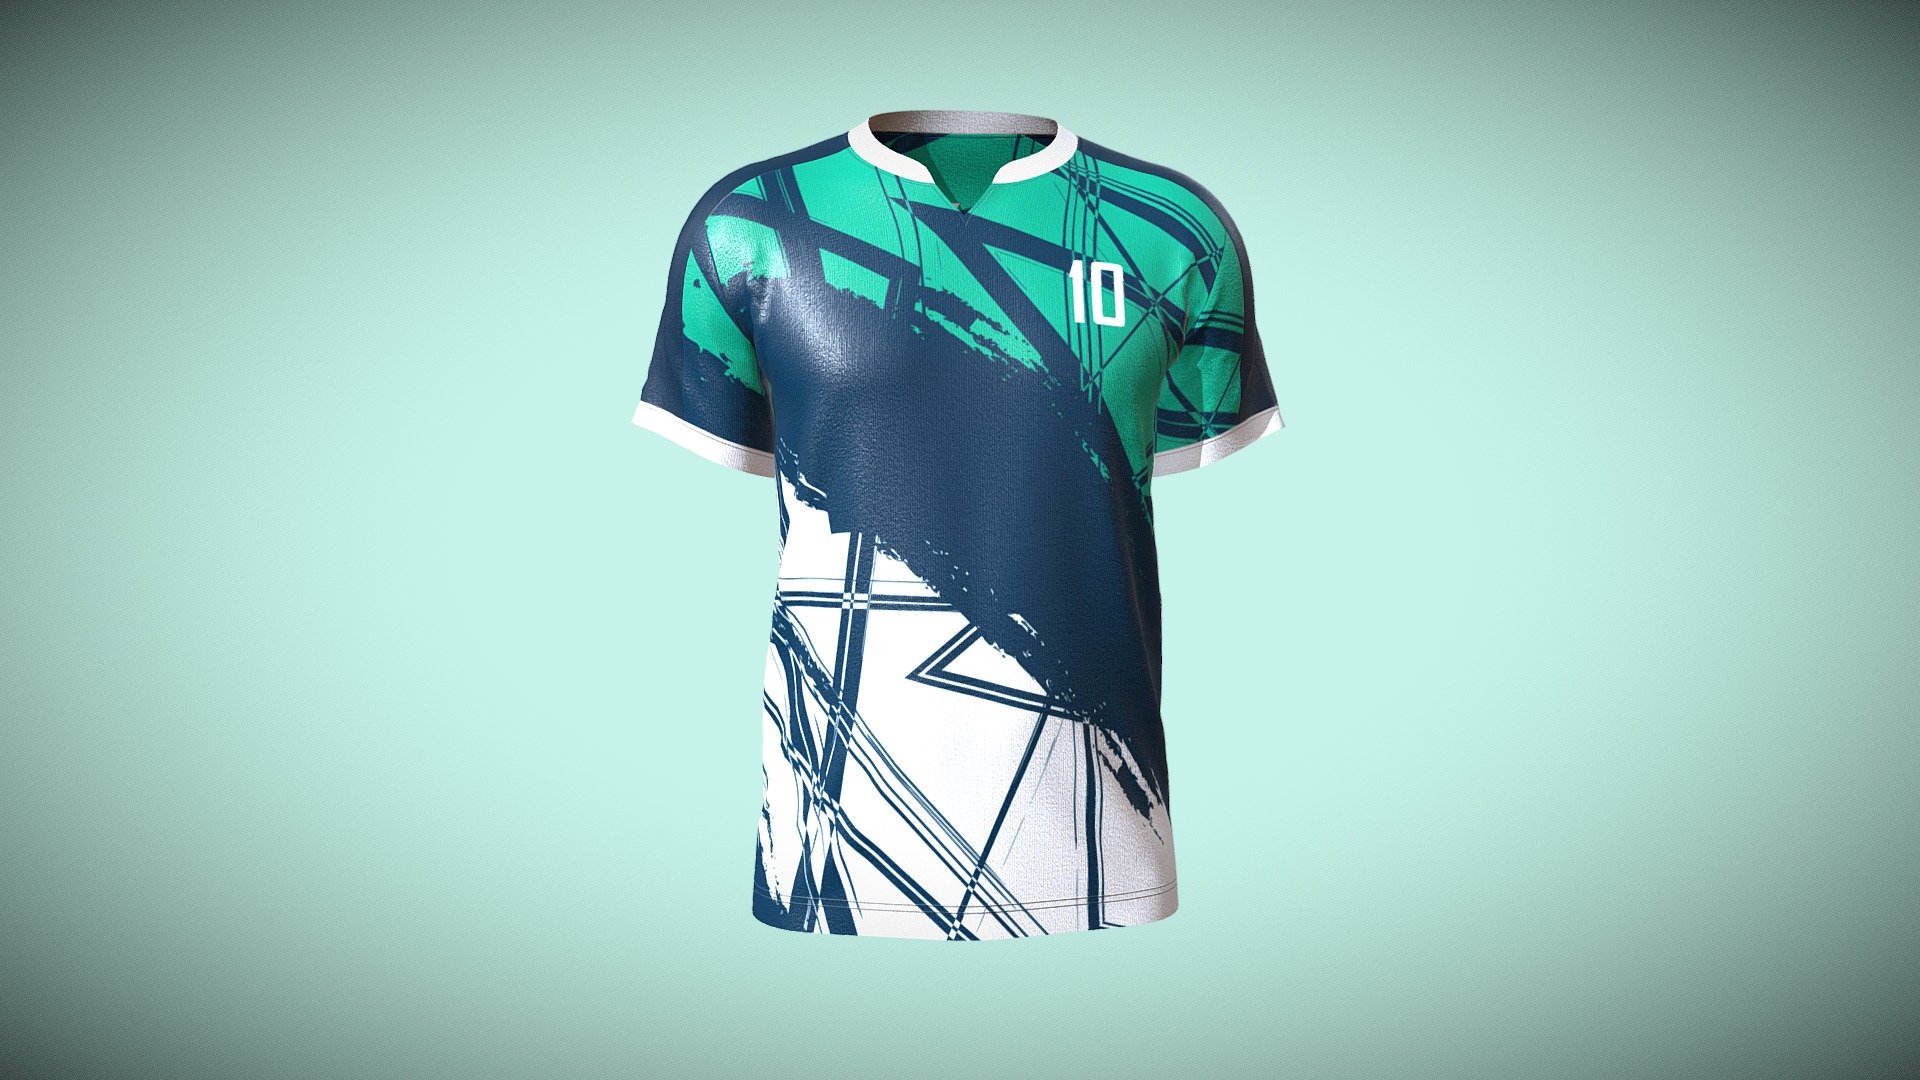 Soccer Teaques Blue With White Jersey Player-10

I am a Professional 3D Fashion/Apprel Designer. I have 7 years working experience about 3D Fashion. I am working with Clo3d, Marvelous Designer (MD), Daz3d, Blender, Cinema4d, Etc.

Features:
1.  2k UV Texture
2.  Triangle mesh
3.  Textures with Non-overlapping UV Map (2048x2048 Pixels)
4.  In additonal Textures folder have diffuse,displacement,metalness,normal,opacity,roughness maps.

Attachment Fils:
Exported Files (All are exported in DAZ Studio scale)
* OBJ
* FBX
* Marvelous Designer/Clo3d file (zprj)

Thanks 3d model